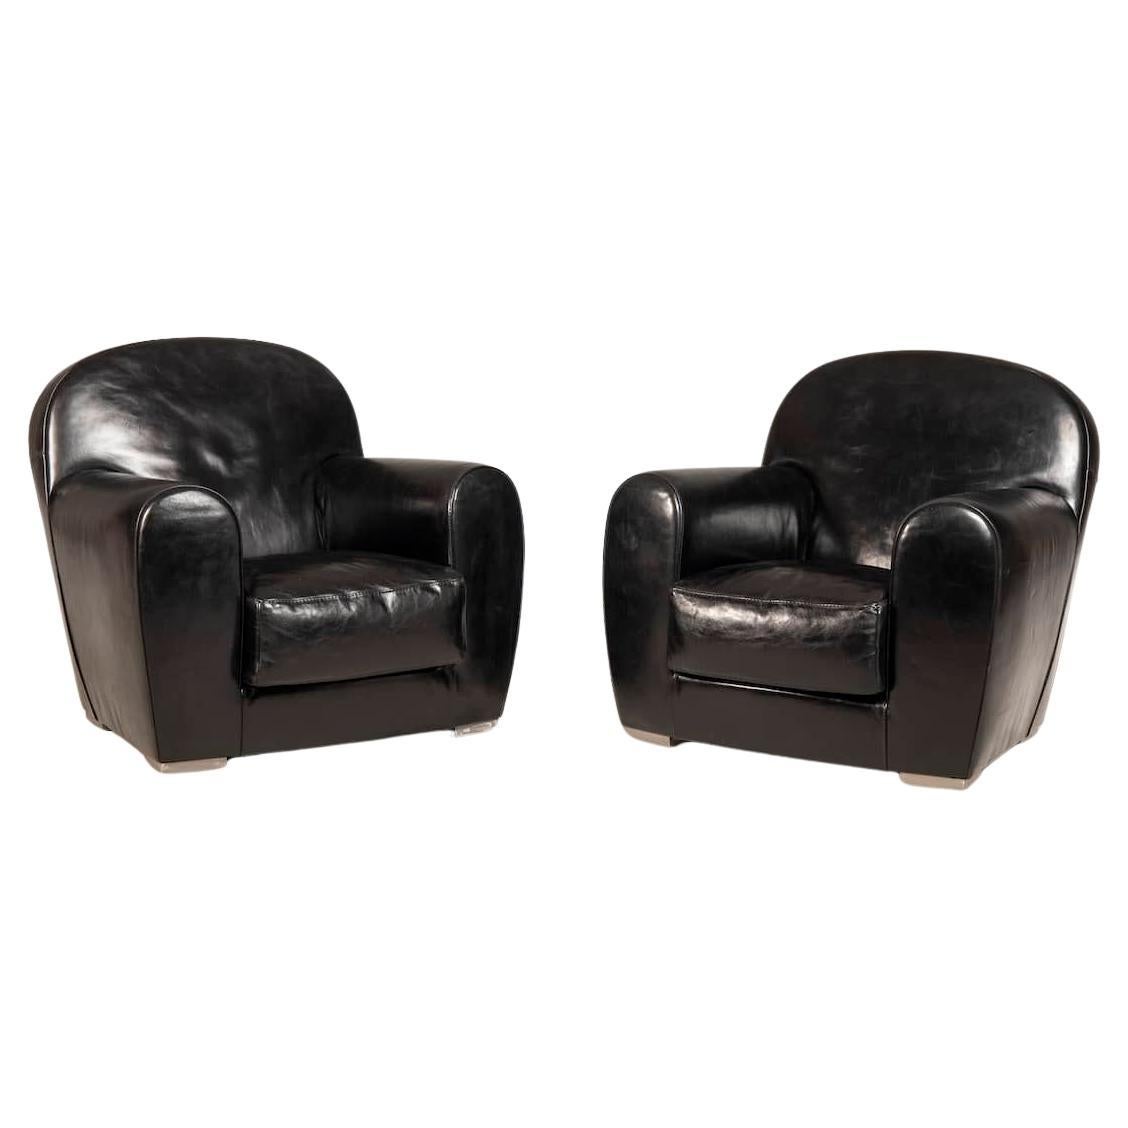 Baxter Black Leather Diner Model pair of Armchairs  For Sale